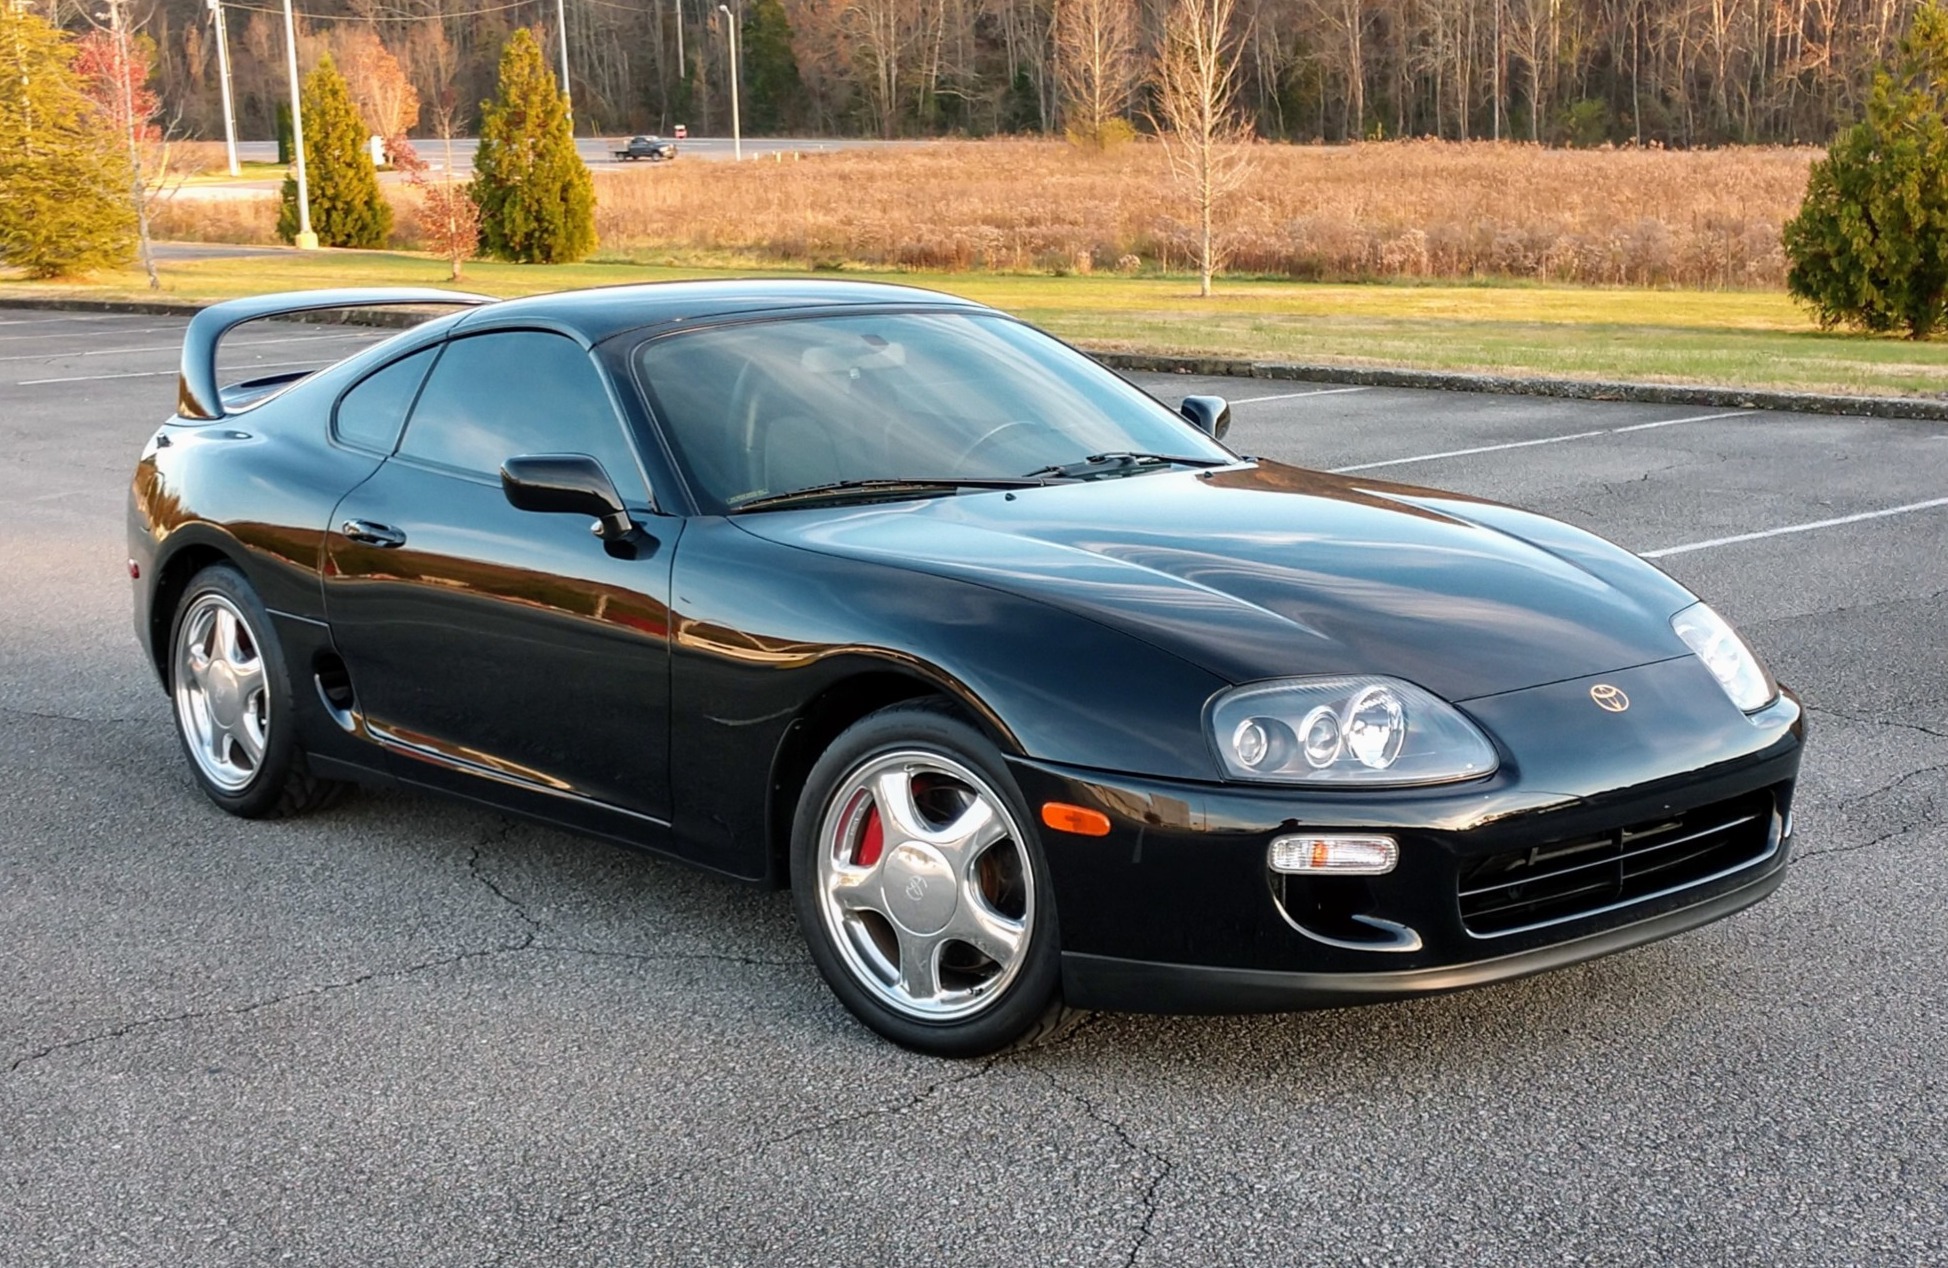 1998 Toyota Supra Turbo 6-Speed for sale on BaT Auctions - sold for $66,388  on December 10, 2018 (Lot #14,702) | Bring a Trailer